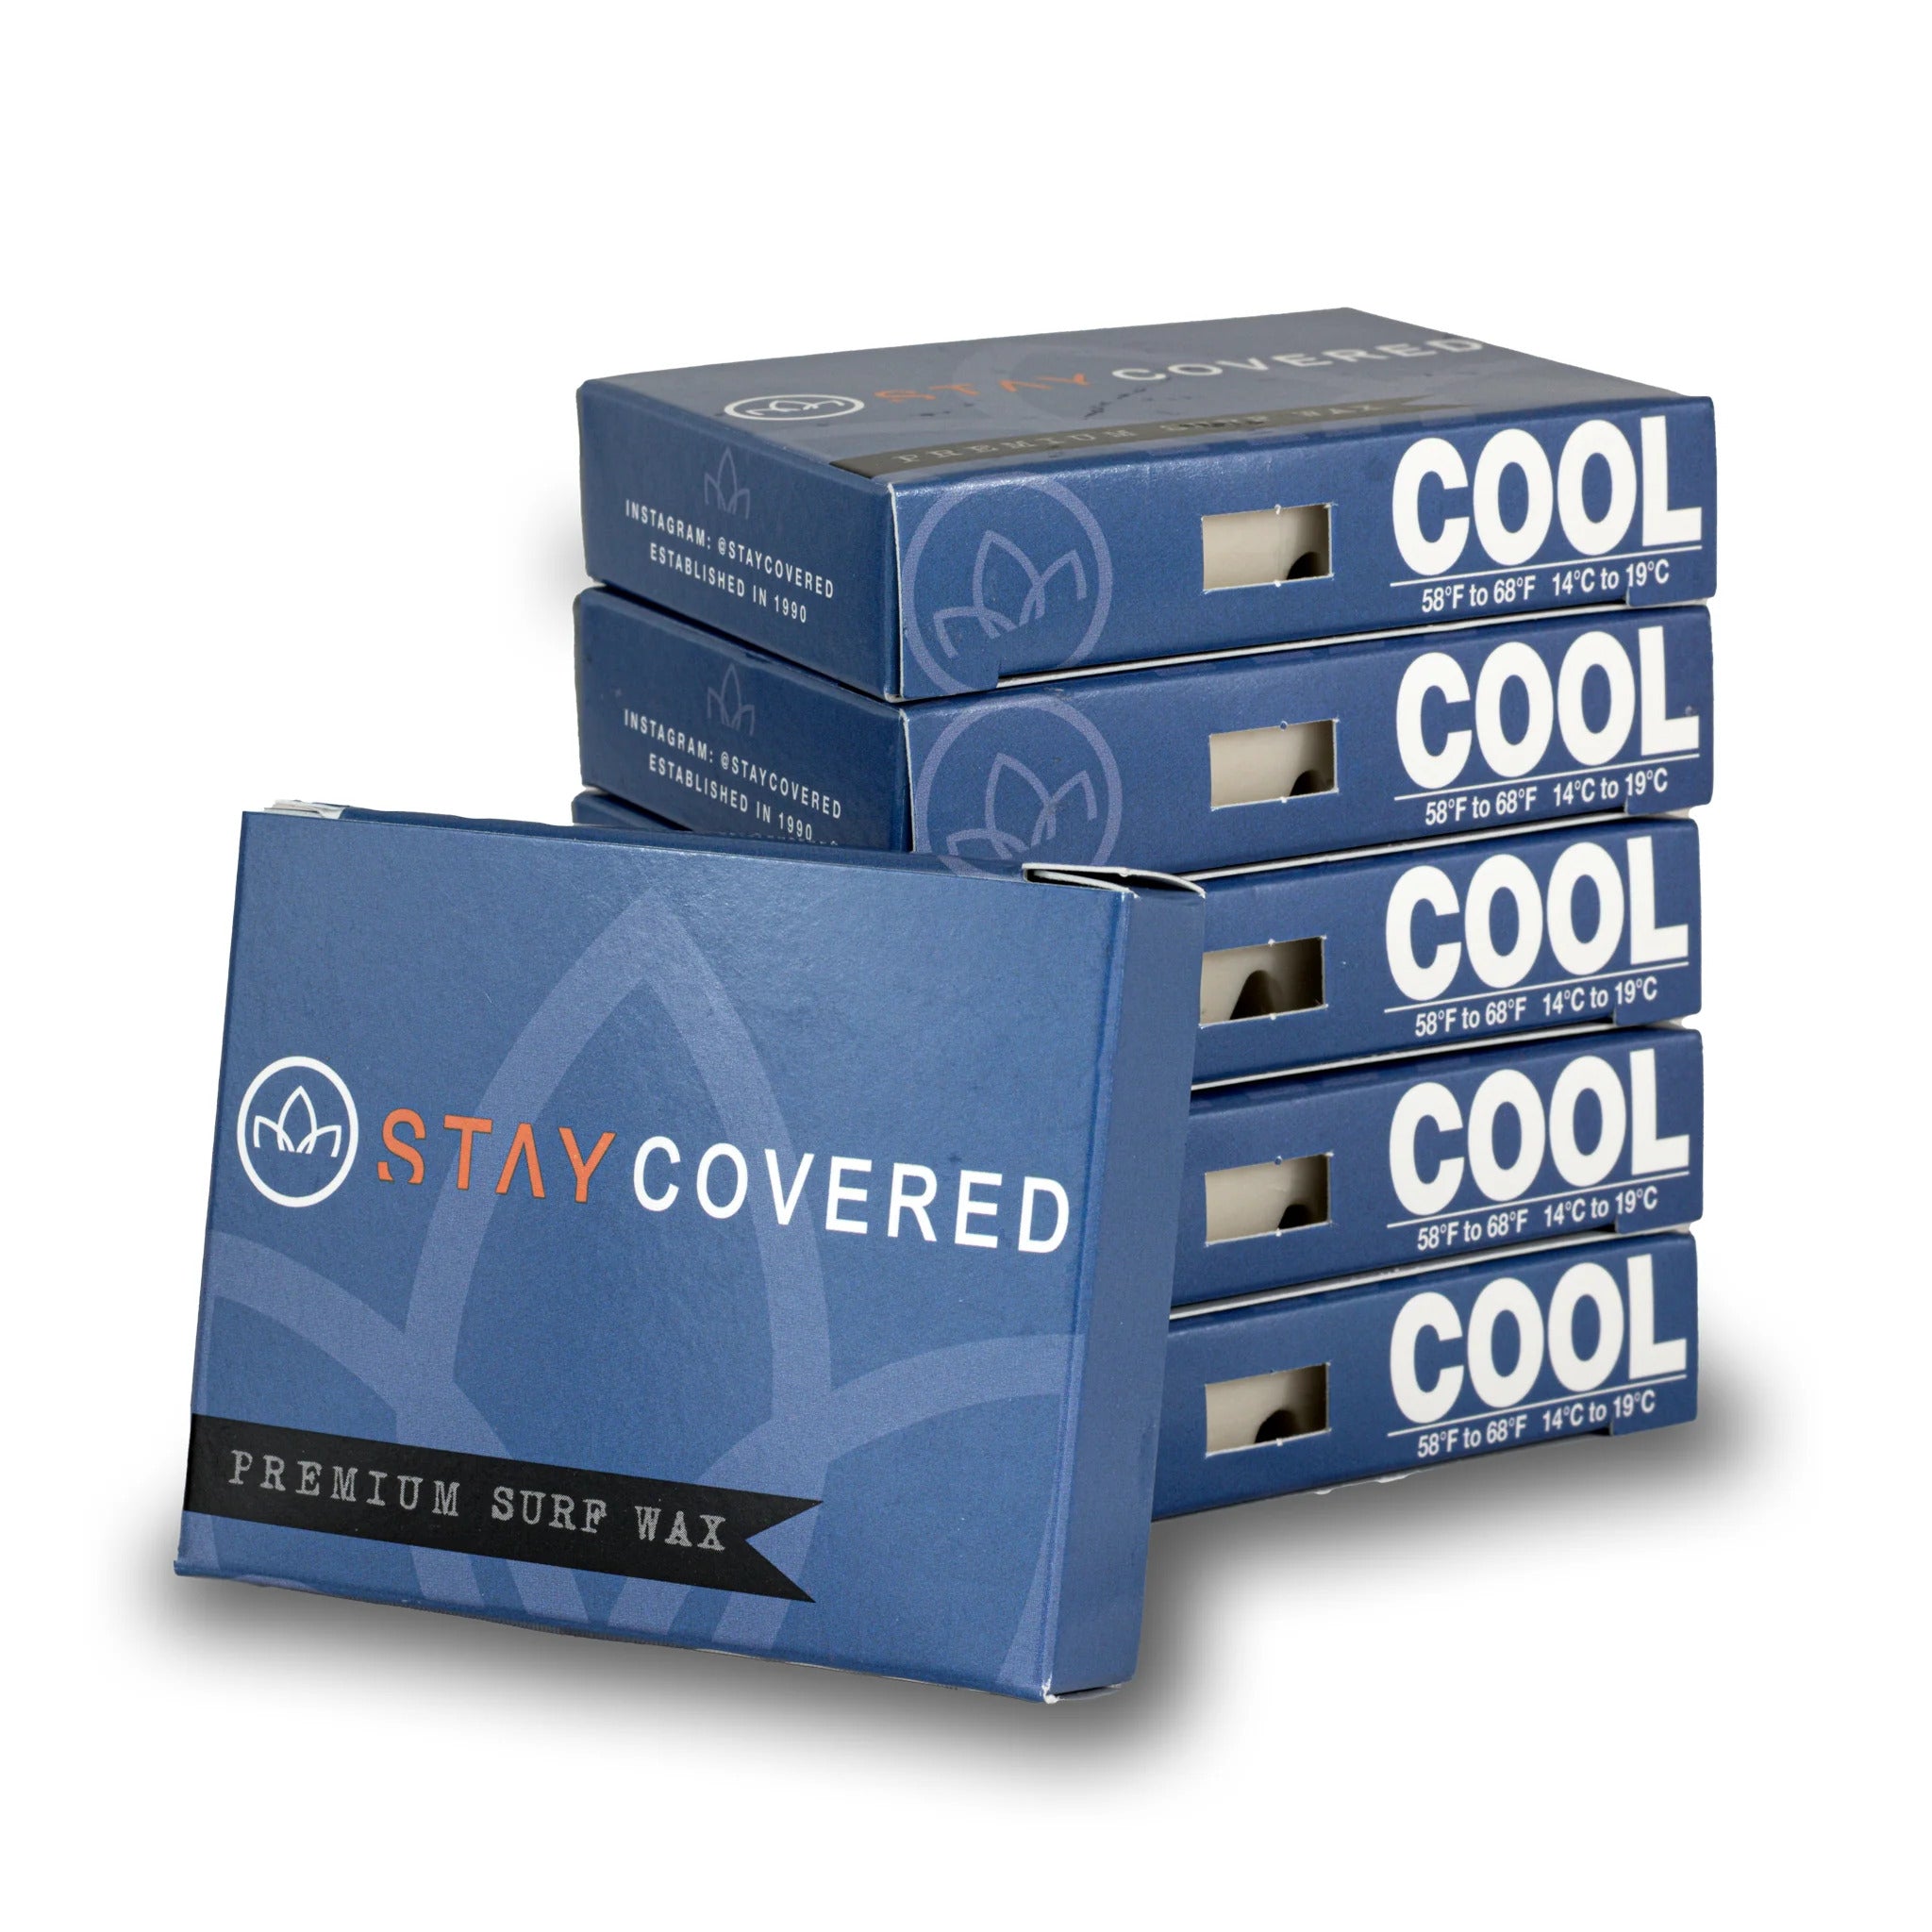 STAY COVERED - Organic Surf Wax - COOL